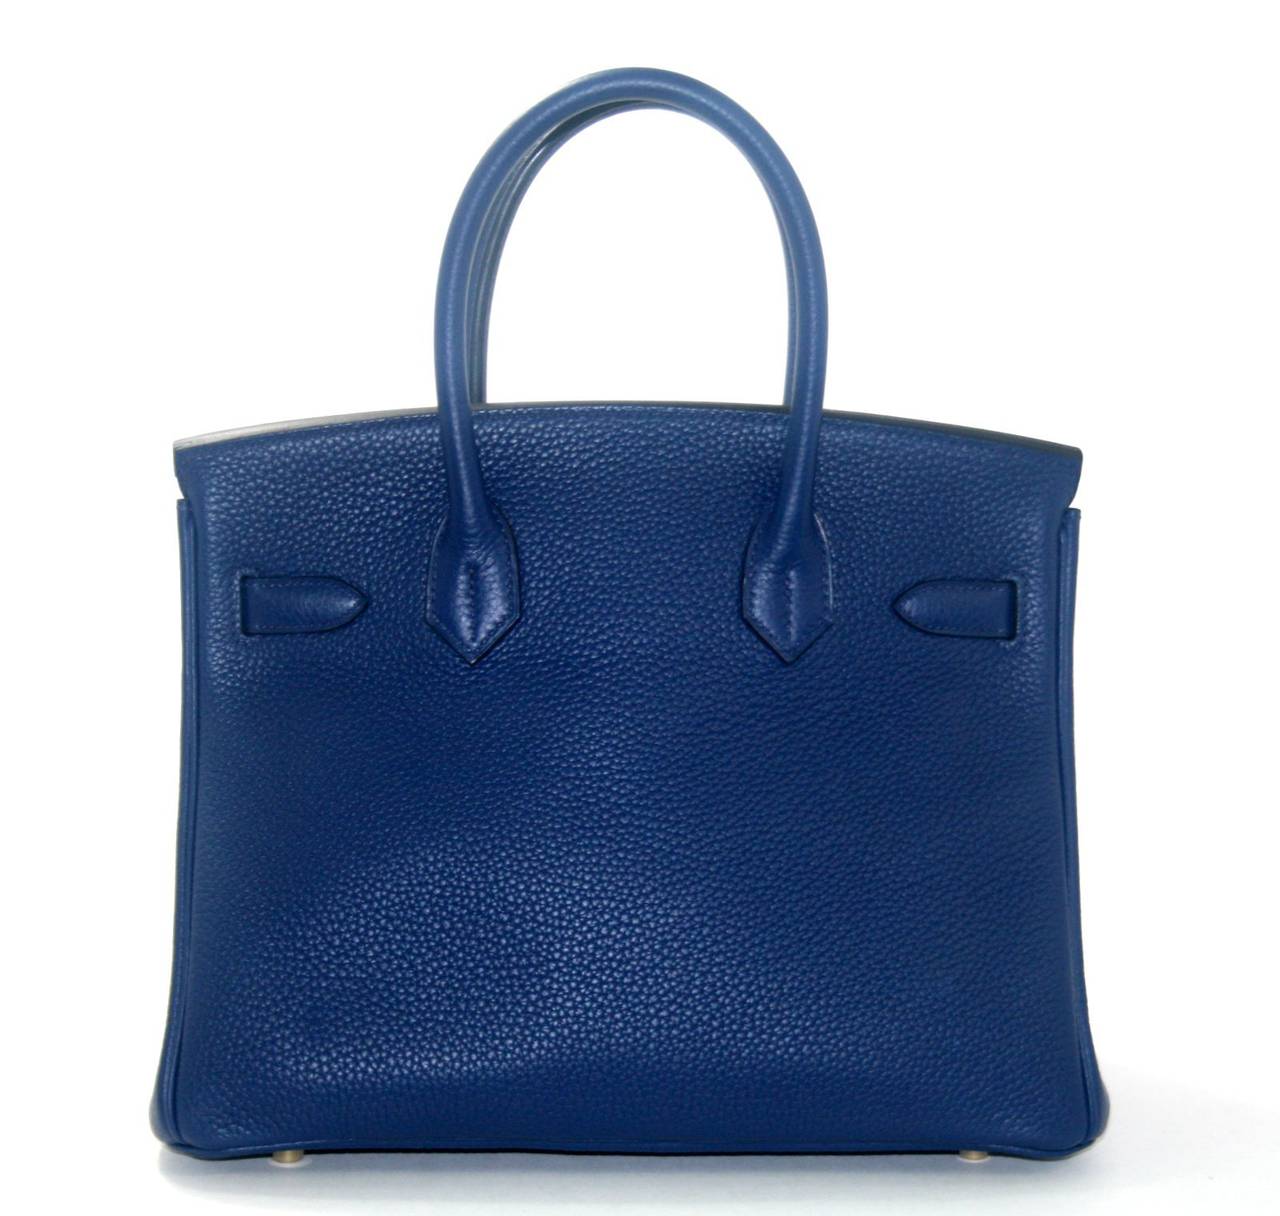 Never before carried, this Hermès Blue Sapphire Clemence 30 cm Birkin is pristine.  The protective plastic remains intact on the hardware and it has been carefully stored.   Considered the ultimate luxury item the world over and hand stitched by